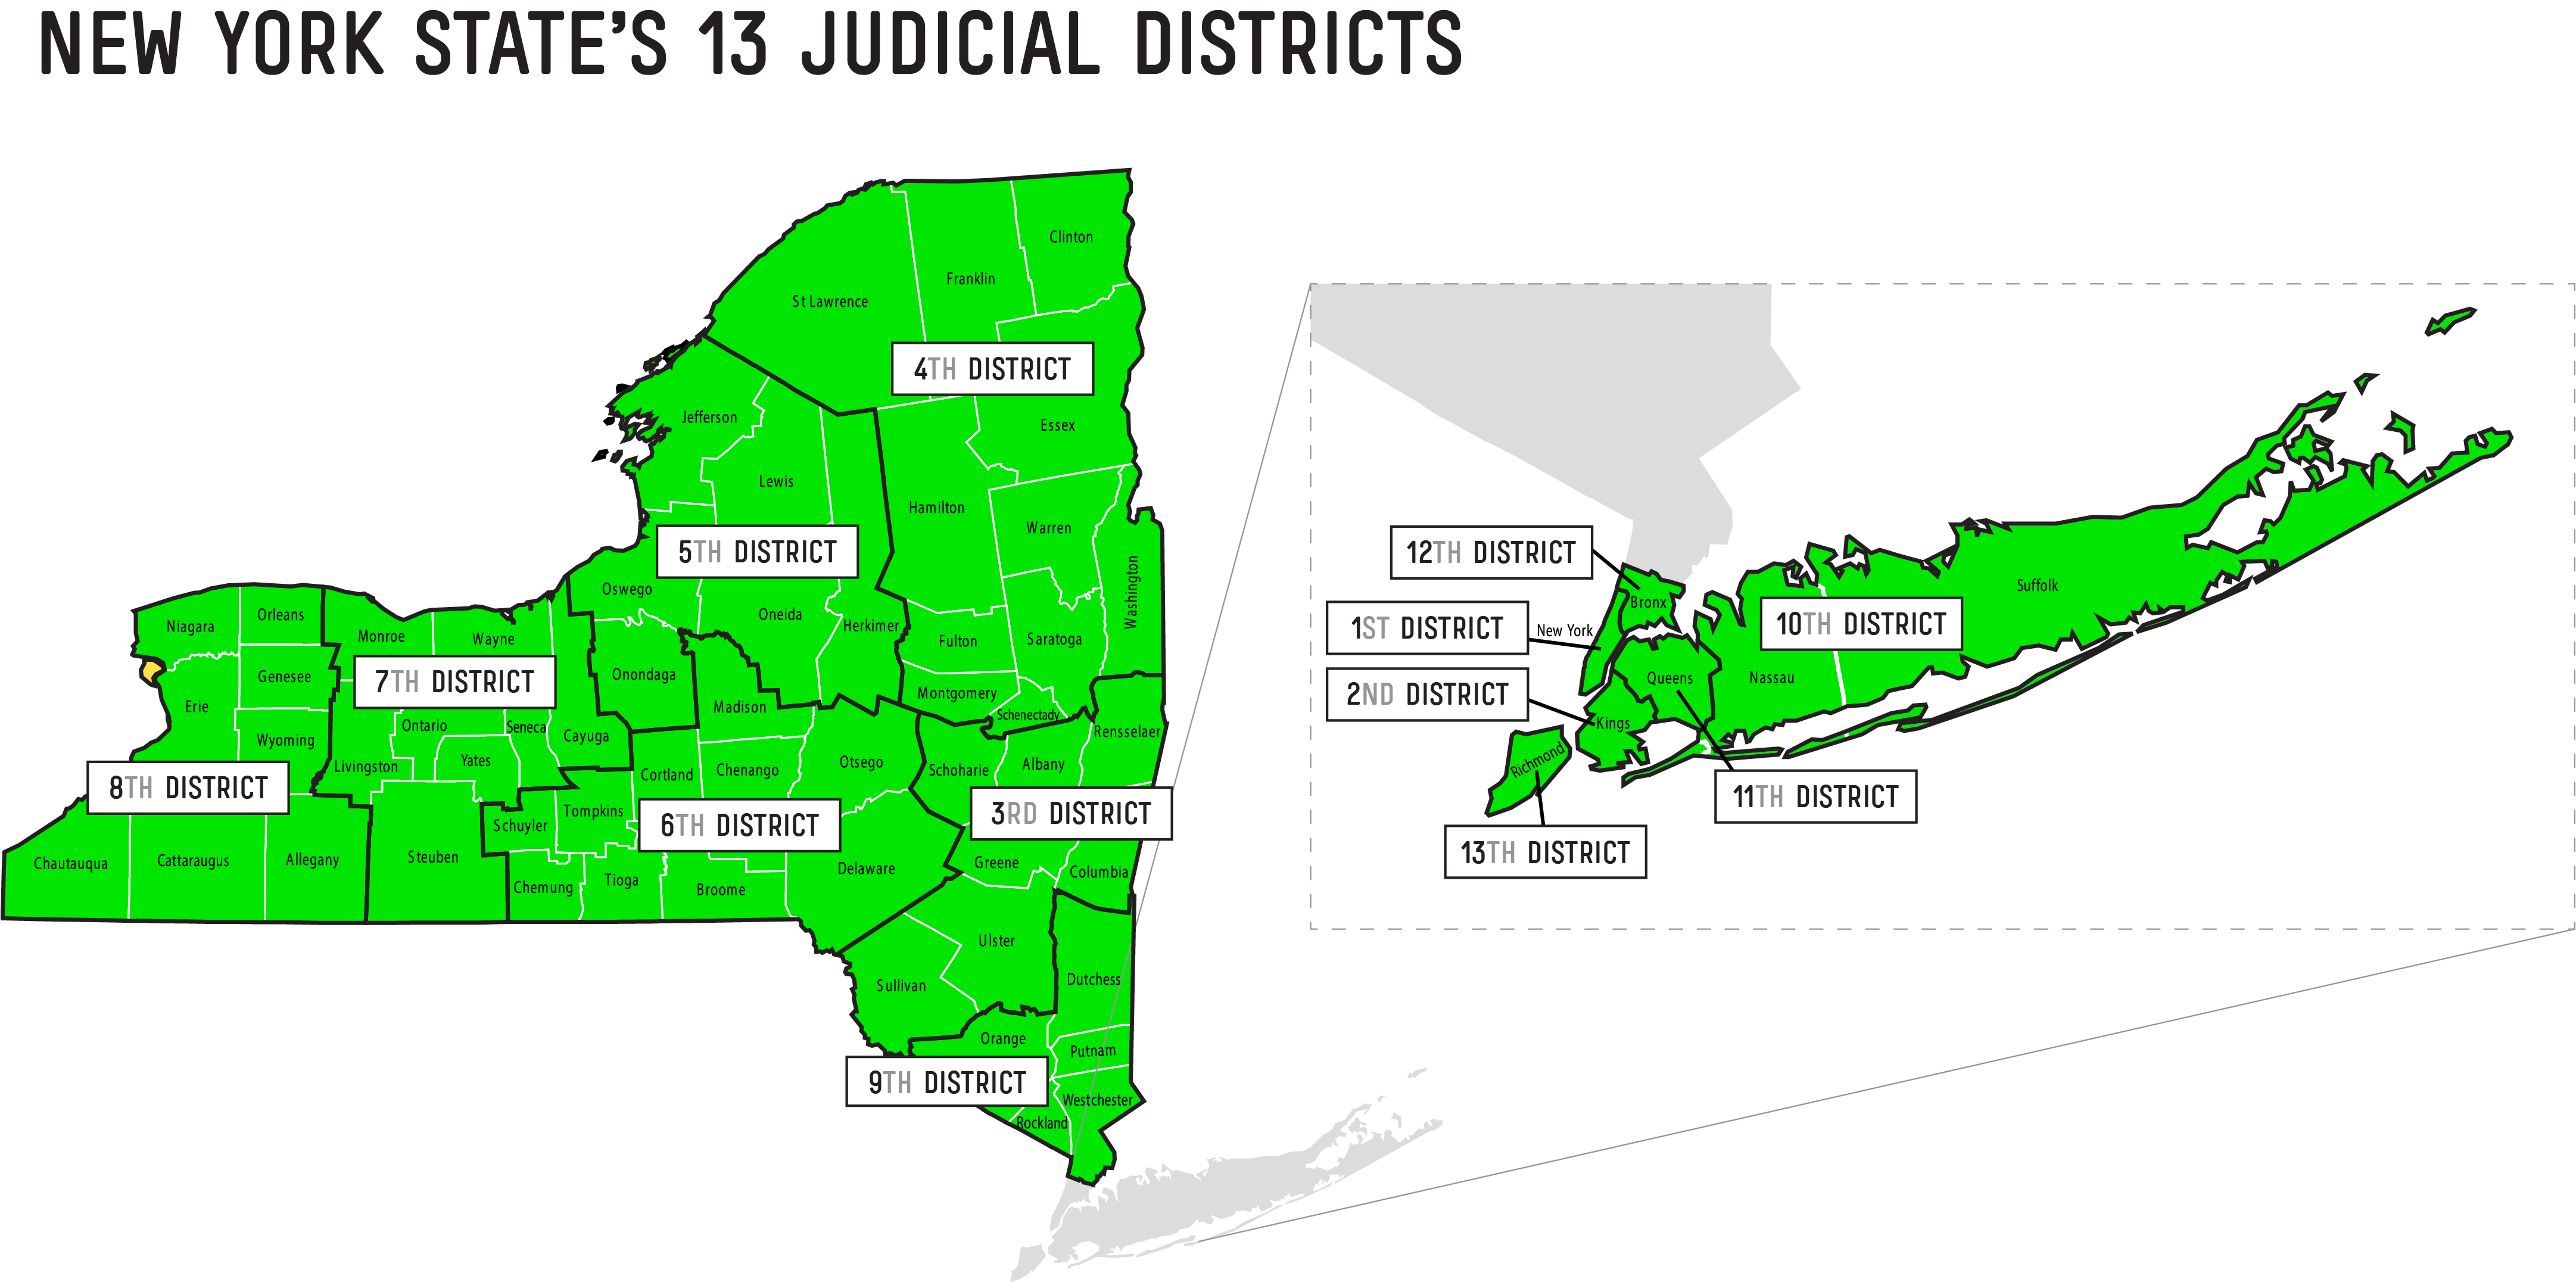 NewYorkState_CourtDistricts_May26_G964796920